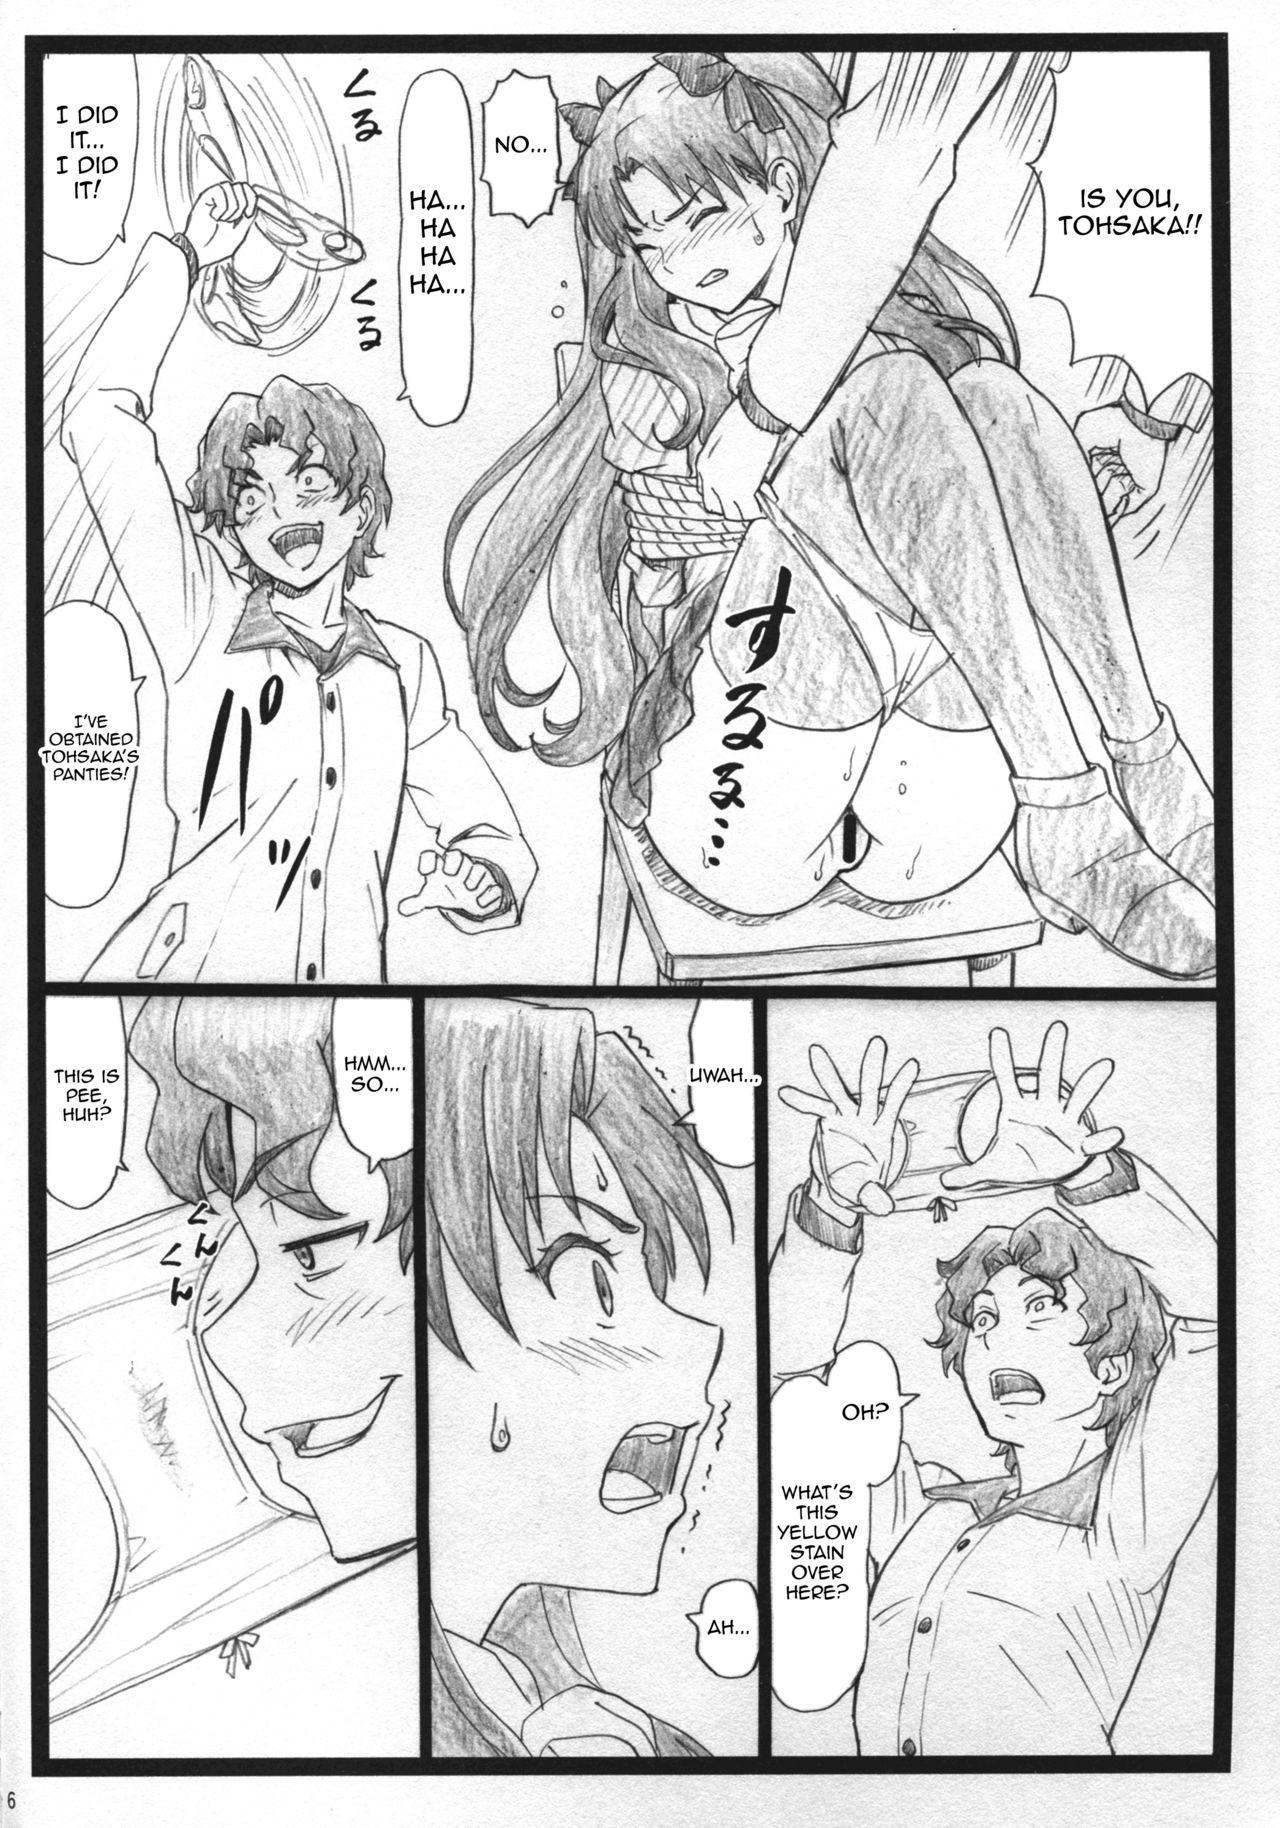 Flagra Rin to Shite... | With Rin... - Fate stay night Amiga - Page 6